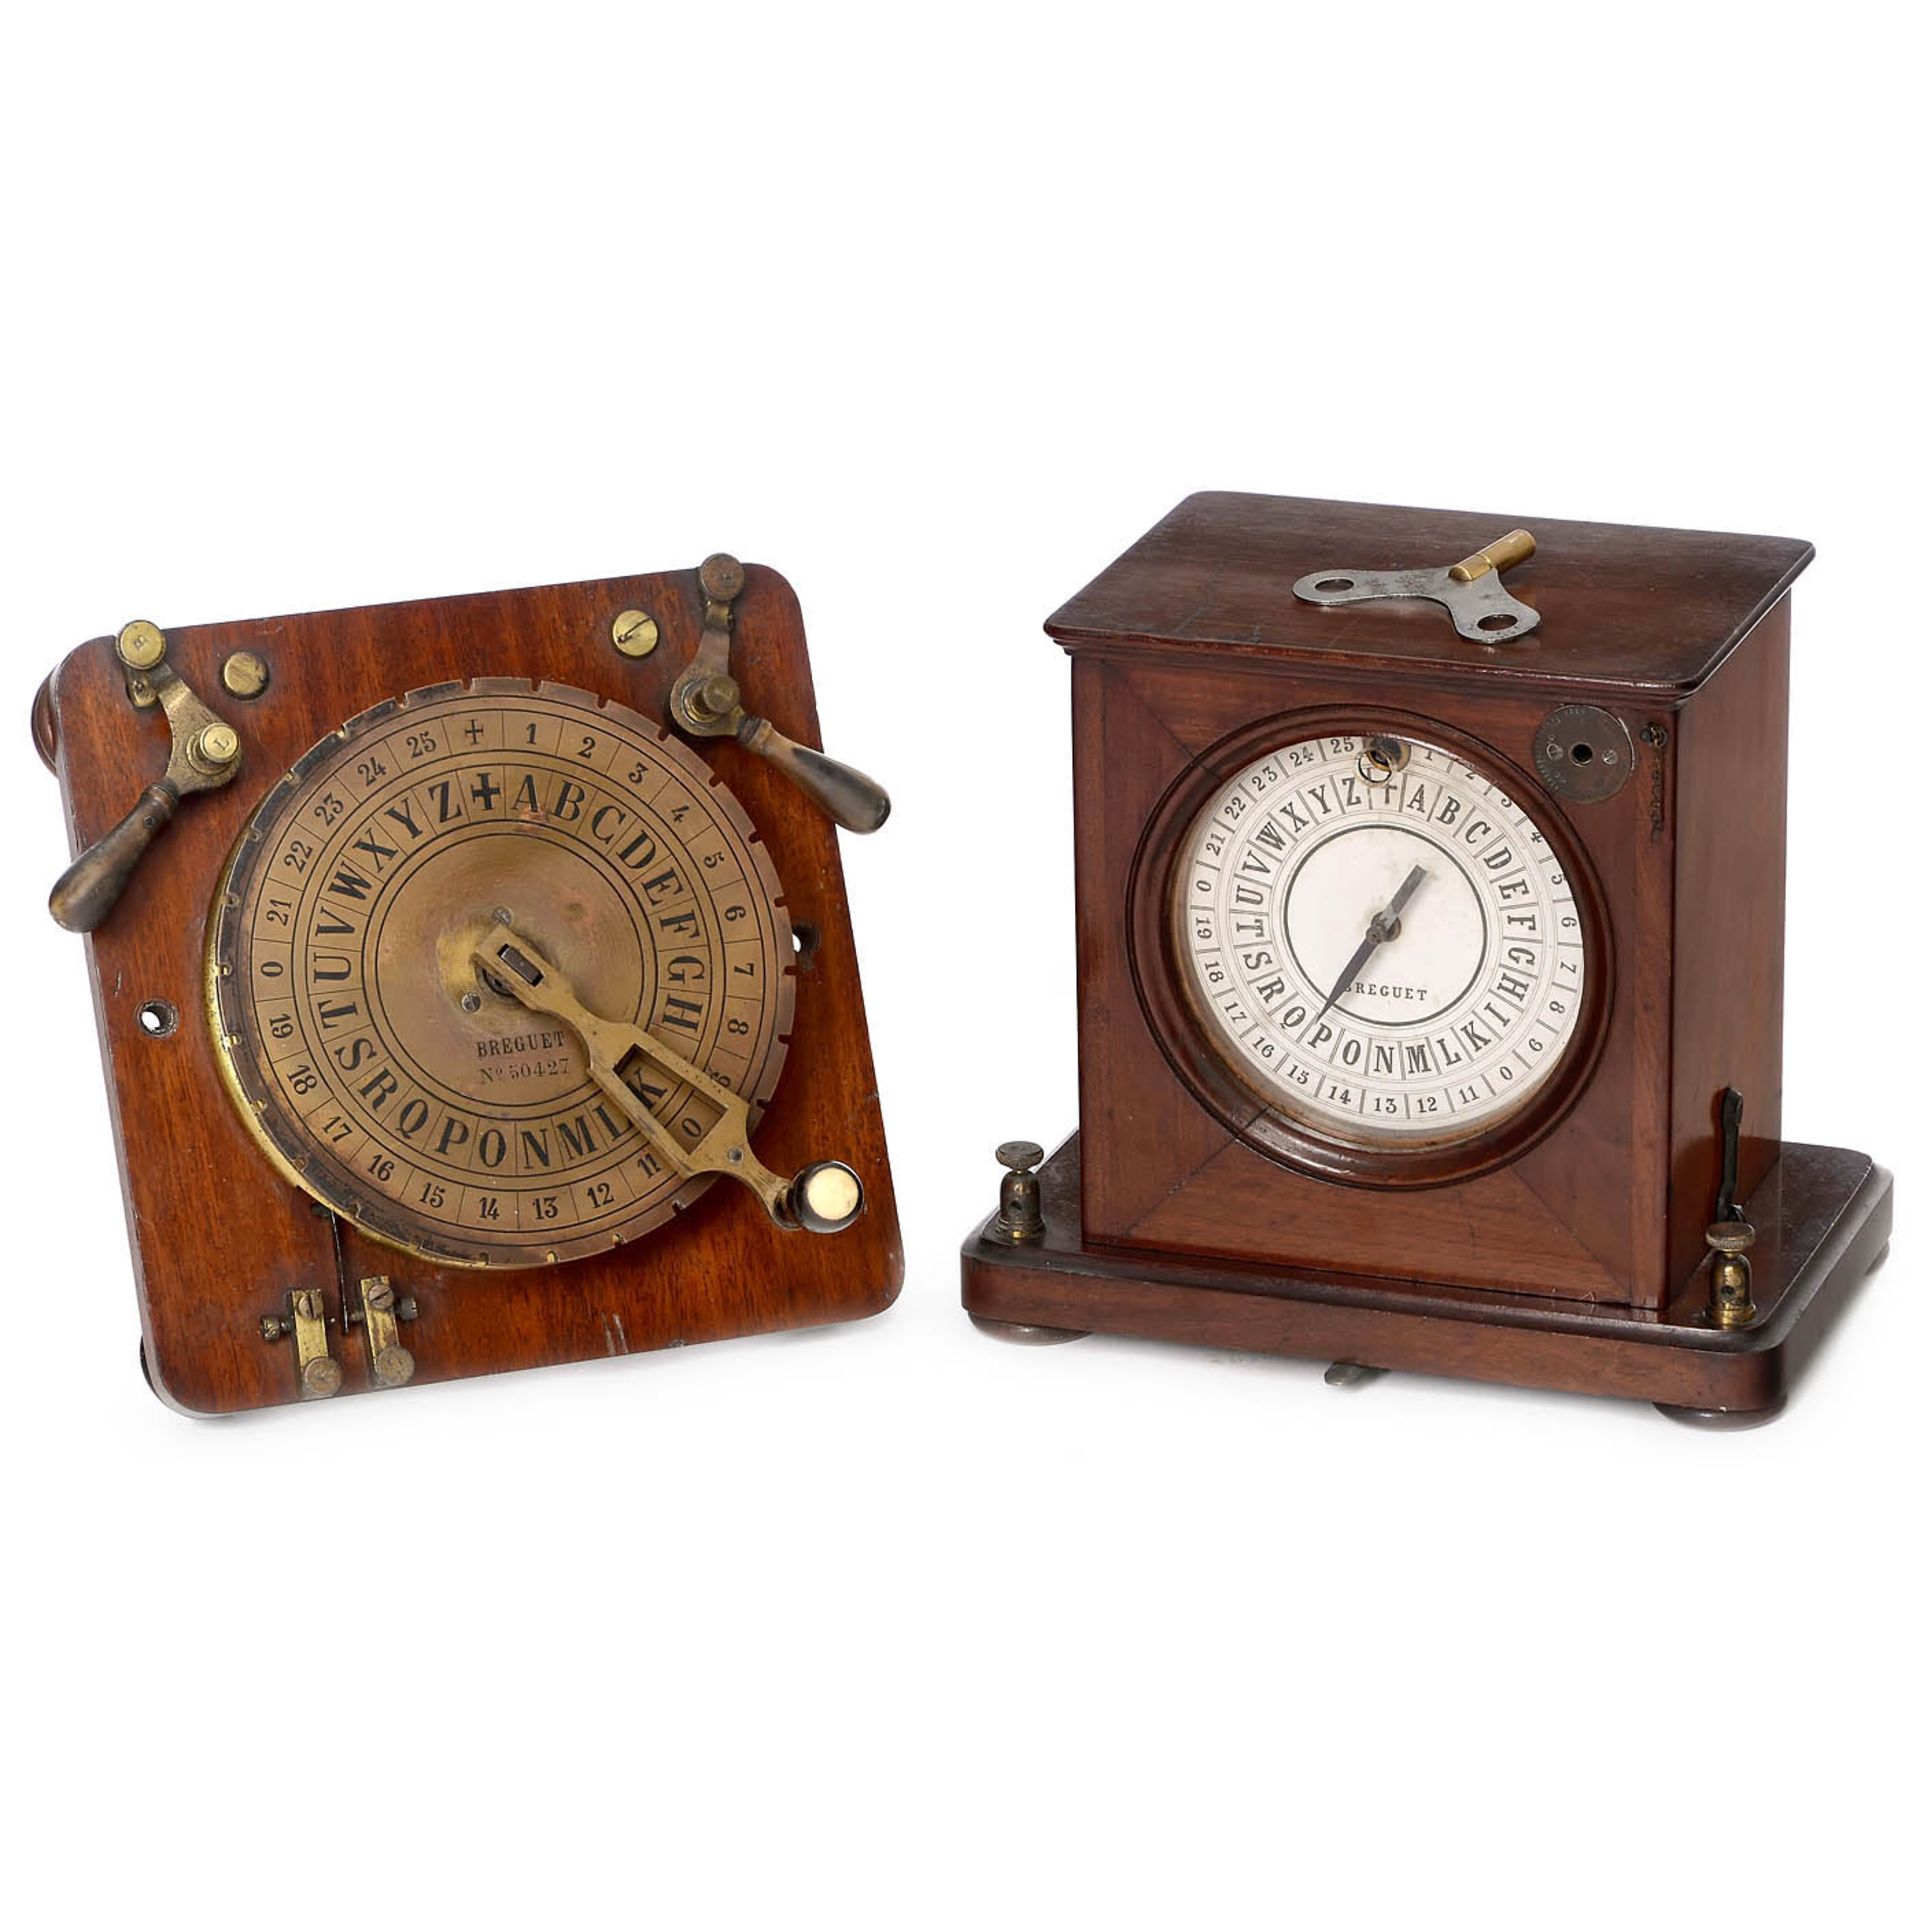 French Dial Telegraph Set by Br&#233;guet, c. 1855 - Image 3 of 4